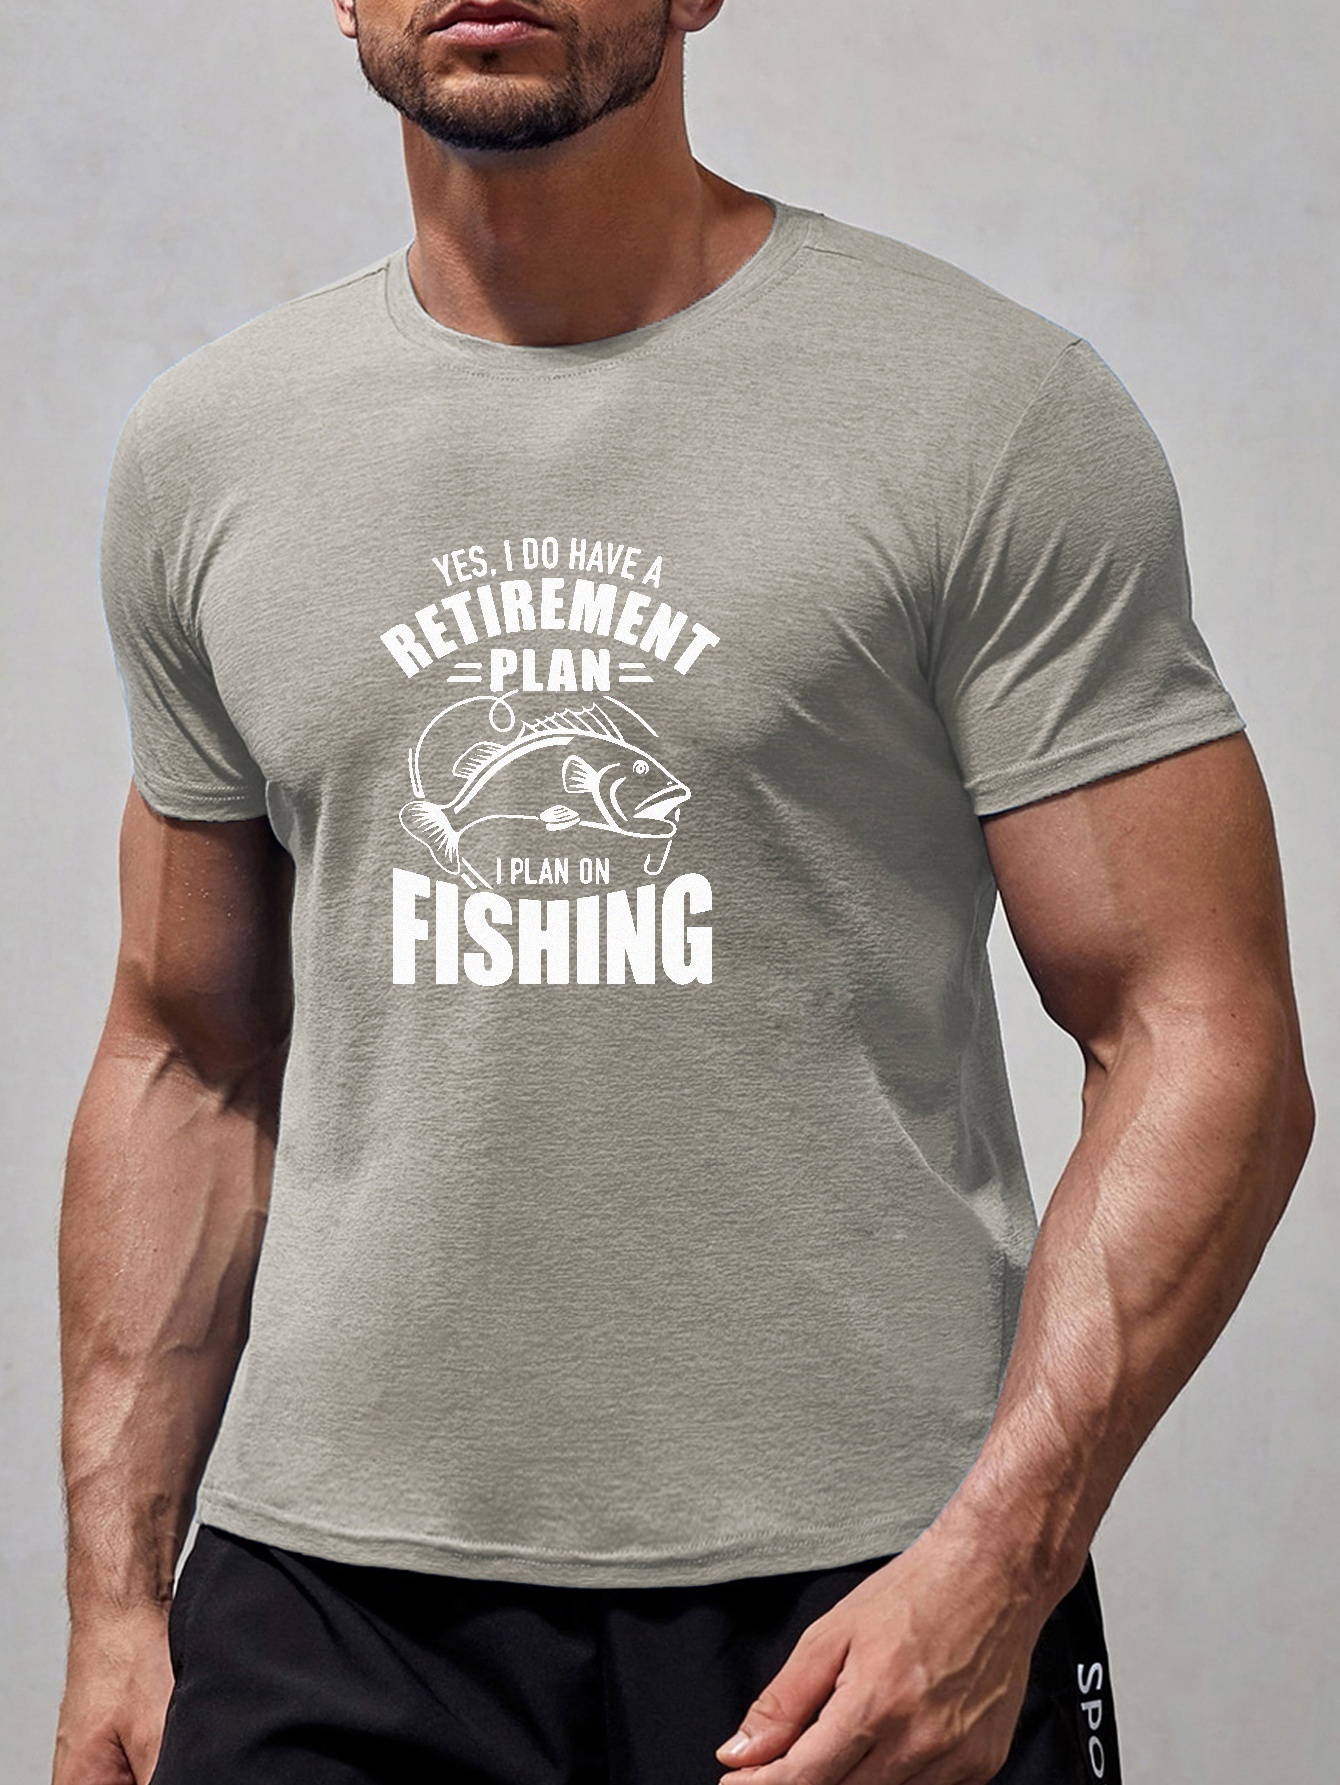 Yes, I Do Have A Retirement Plan To Go Fishing T shirt Men T-Shirt